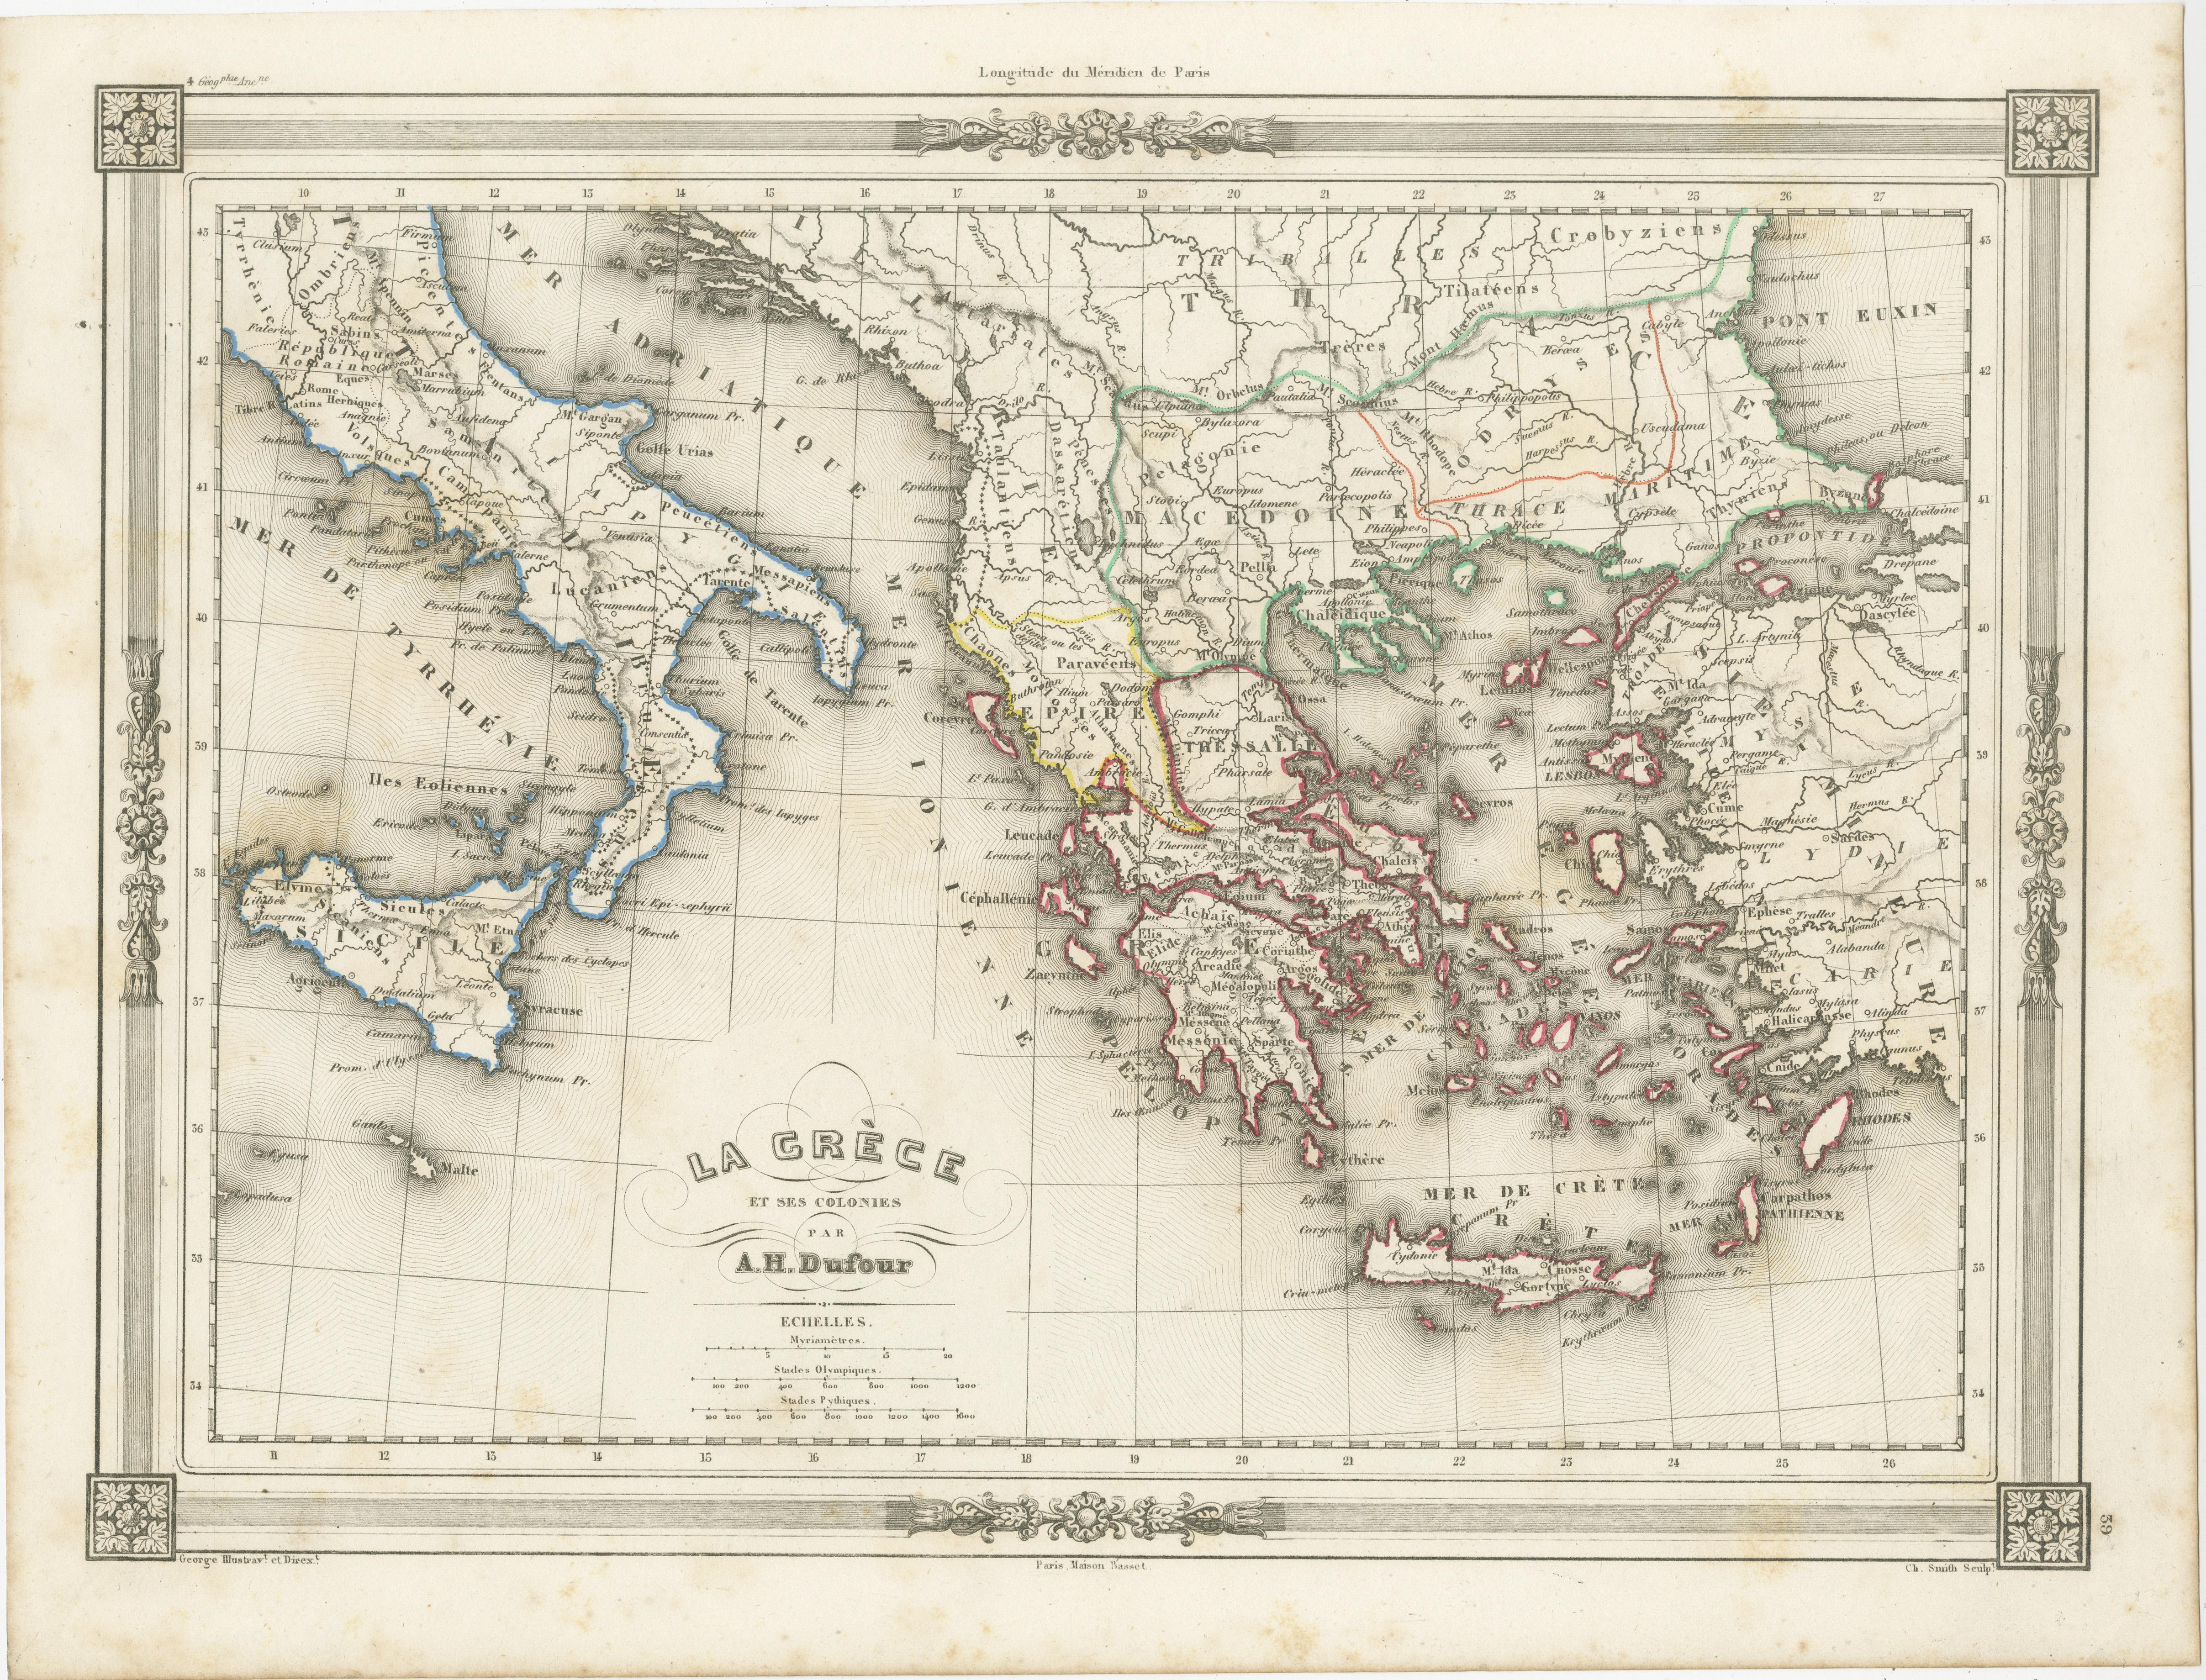 Antique map titled 'La Grèce'. Attractive map of Greece and its Colonies. The map covers from the southern part of Italy, including Sicily, to the western parts of Asia Minor and from Macedonia to Crete. This map originates from Maison Basset's 1852